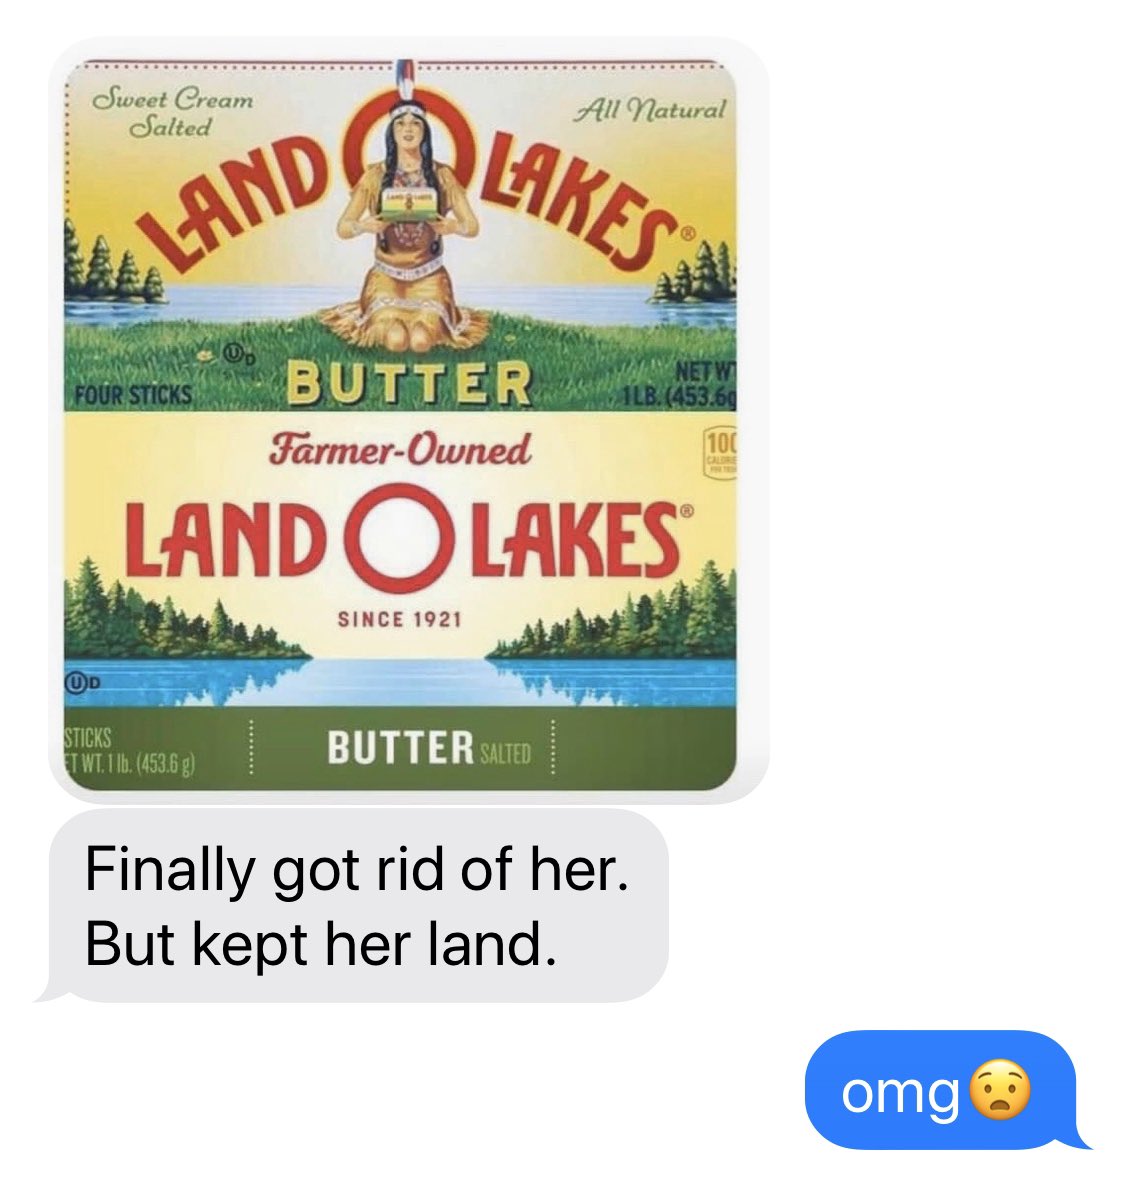 my dad really snapped with this whole land o lakes thing